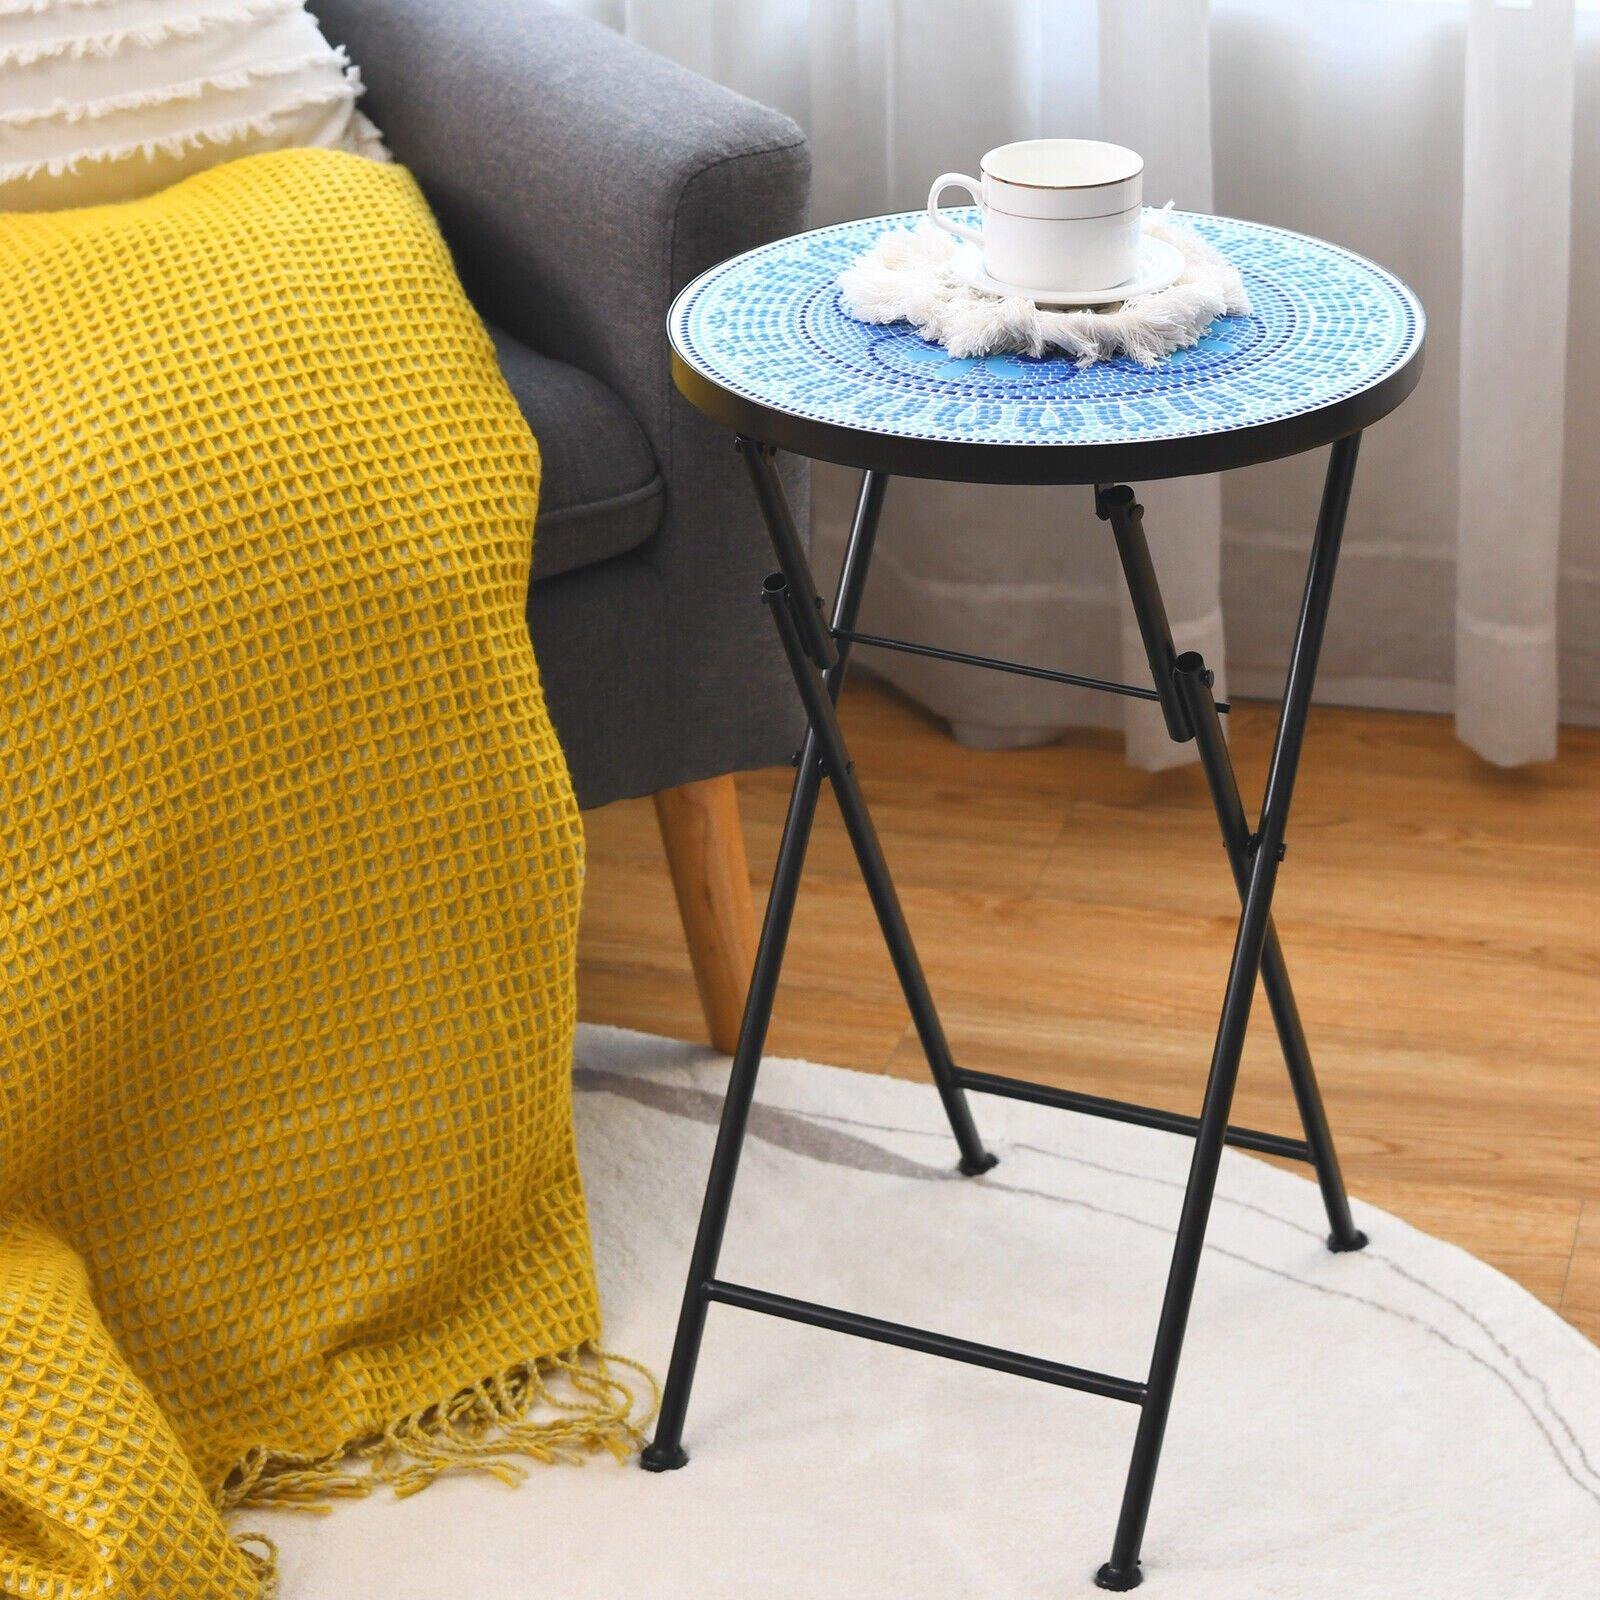 Folding Mosaic Side Table Round Bistro End Table W/ Ceramic Tile Top Plant Stand - image 1